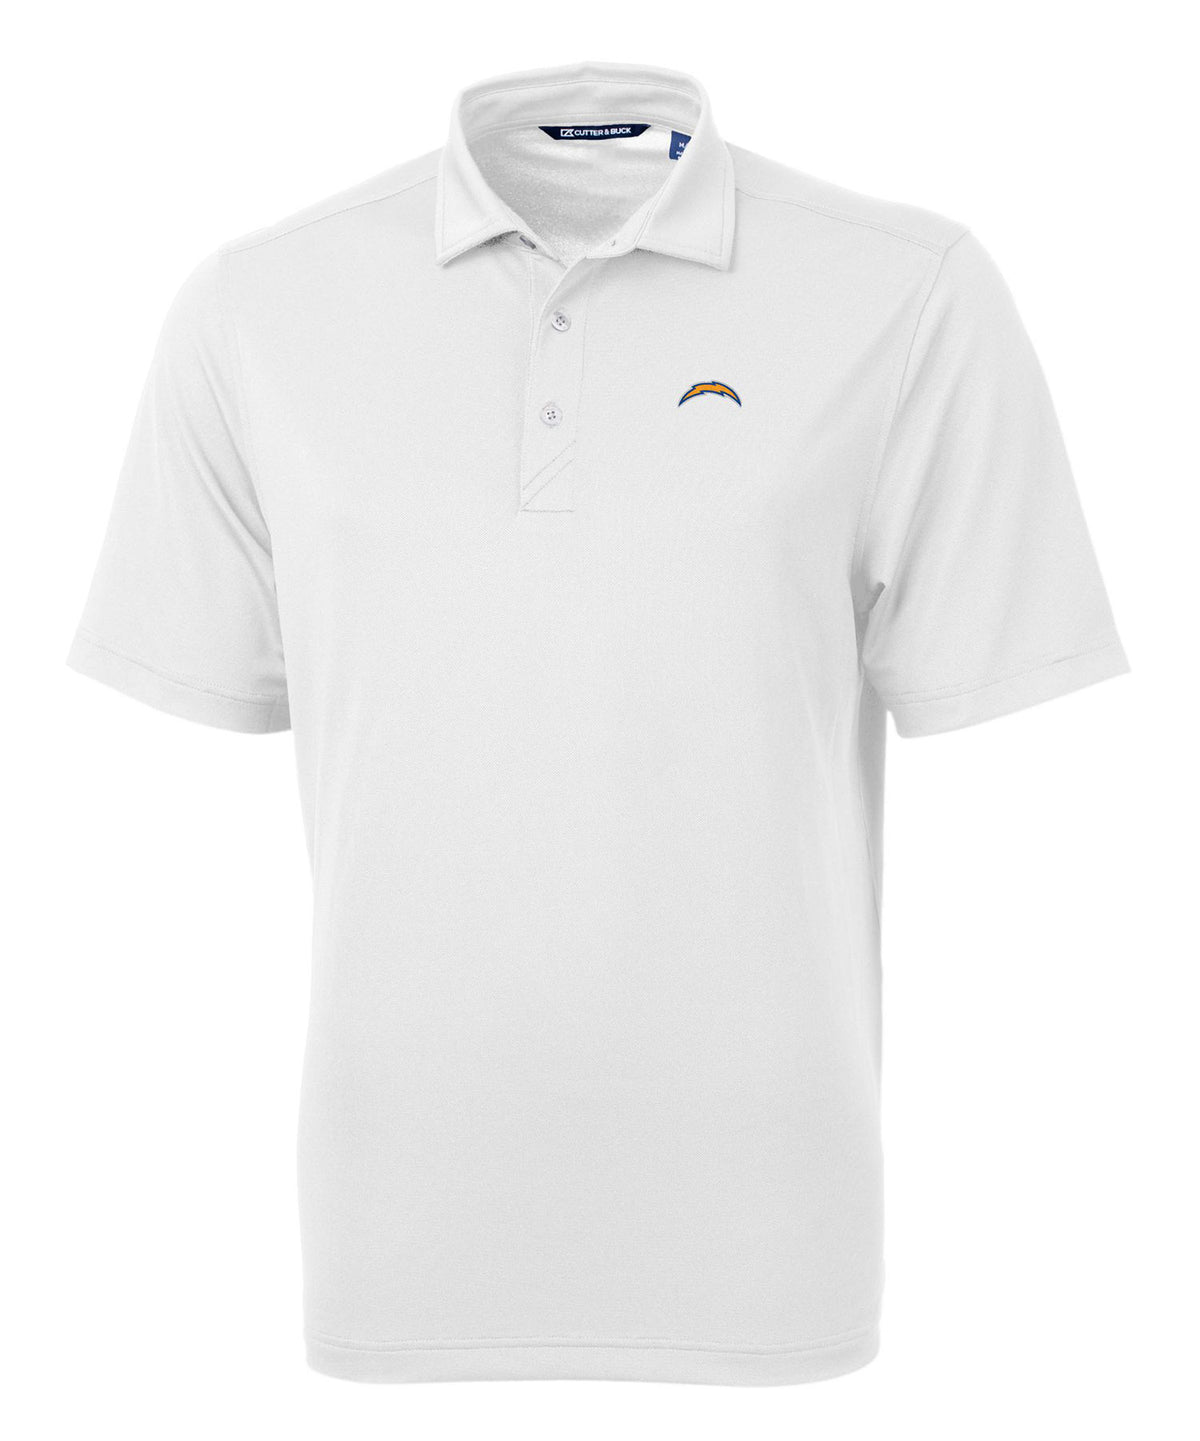 Cutter & Buck Los Angeles Chargers Short Sleeve Polo Knit Shirt, Men's Big & Tall